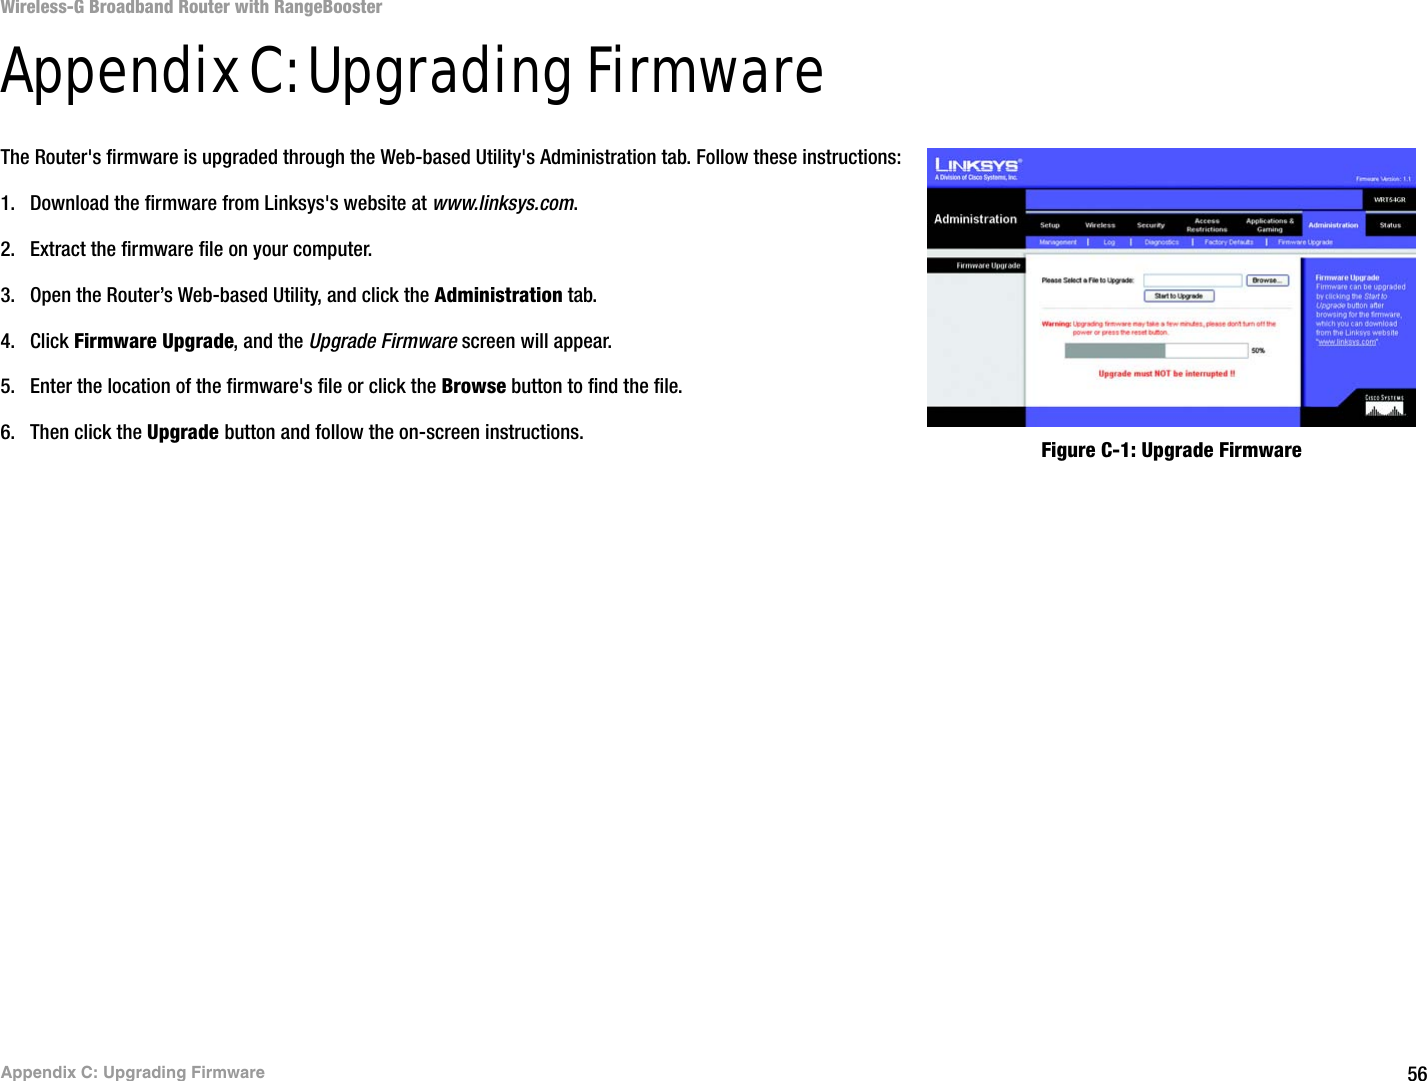 56Appendix C: Upgrading FirmwareWireless-G Broadband Router with RangeBoosterAppendix C: Upgrading FirmwareThe Router&apos;s firmware is upgraded through the Web-based Utility&apos;s Administration tab. Follow these instructions:1. Download the firmware from Linksys&apos;s website at www.linksys.com.2. Extract the firmware file on your computer.3. Open the Router’s Web-based Utility, and click the Administration tab.4. Click Firmware Upgrade, and the Upgrade Firmware screen will appear.5. Enter the location of the firmware&apos;s file or click the Browse button to find the file.6. Then click the Upgrade button and follow the on-screen instructions. Figure C-1: Upgrade Firmware